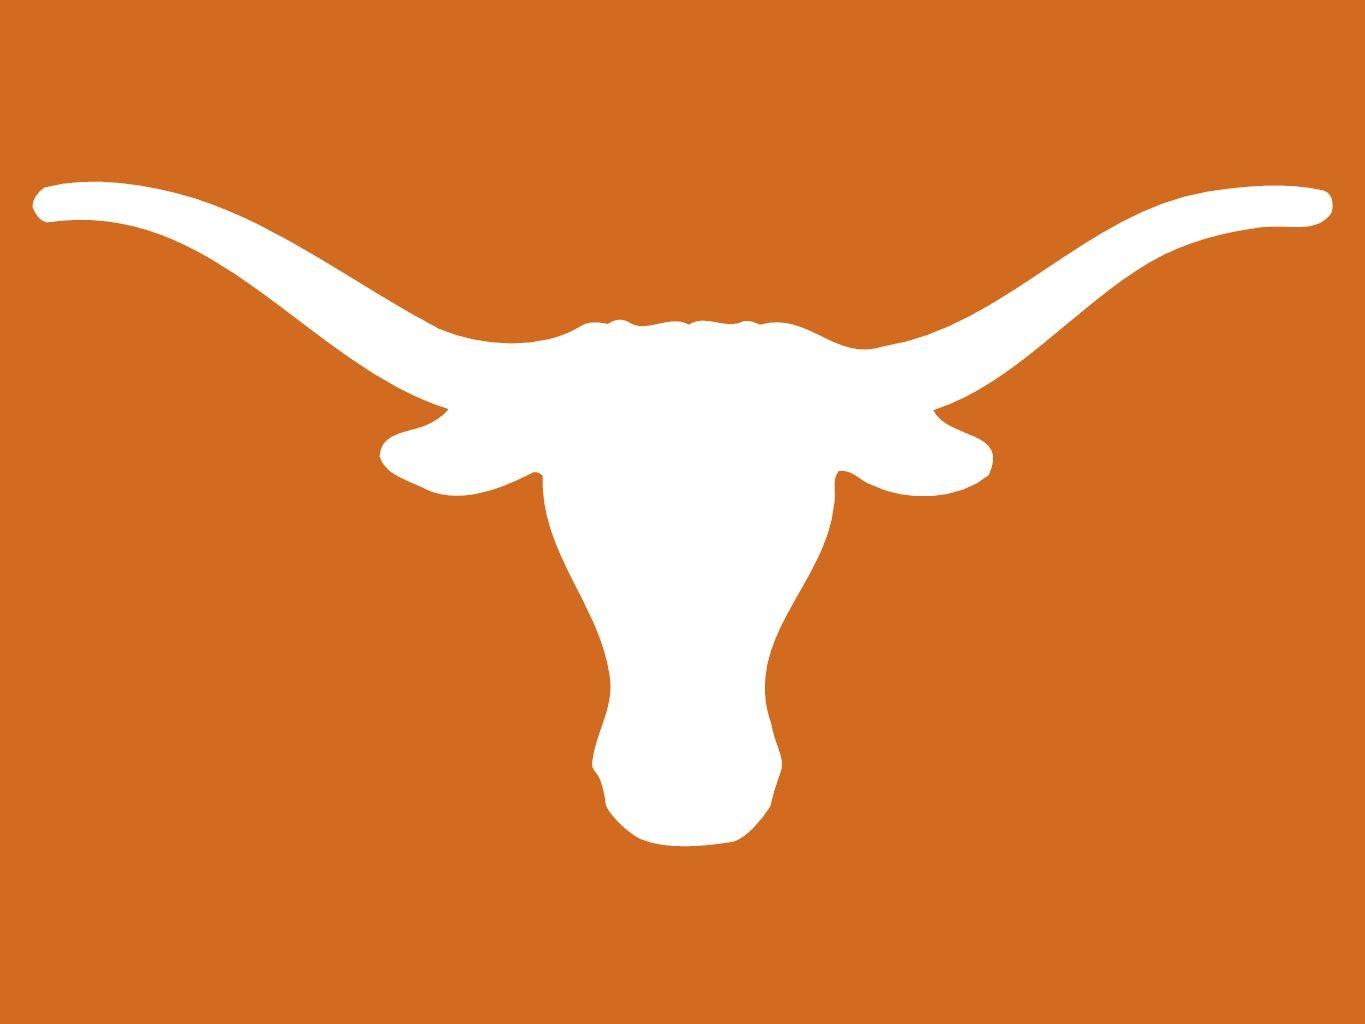 University of Texas Logo - BIG Opportunities to Sell Lab Equipment at Texas Life Science ...